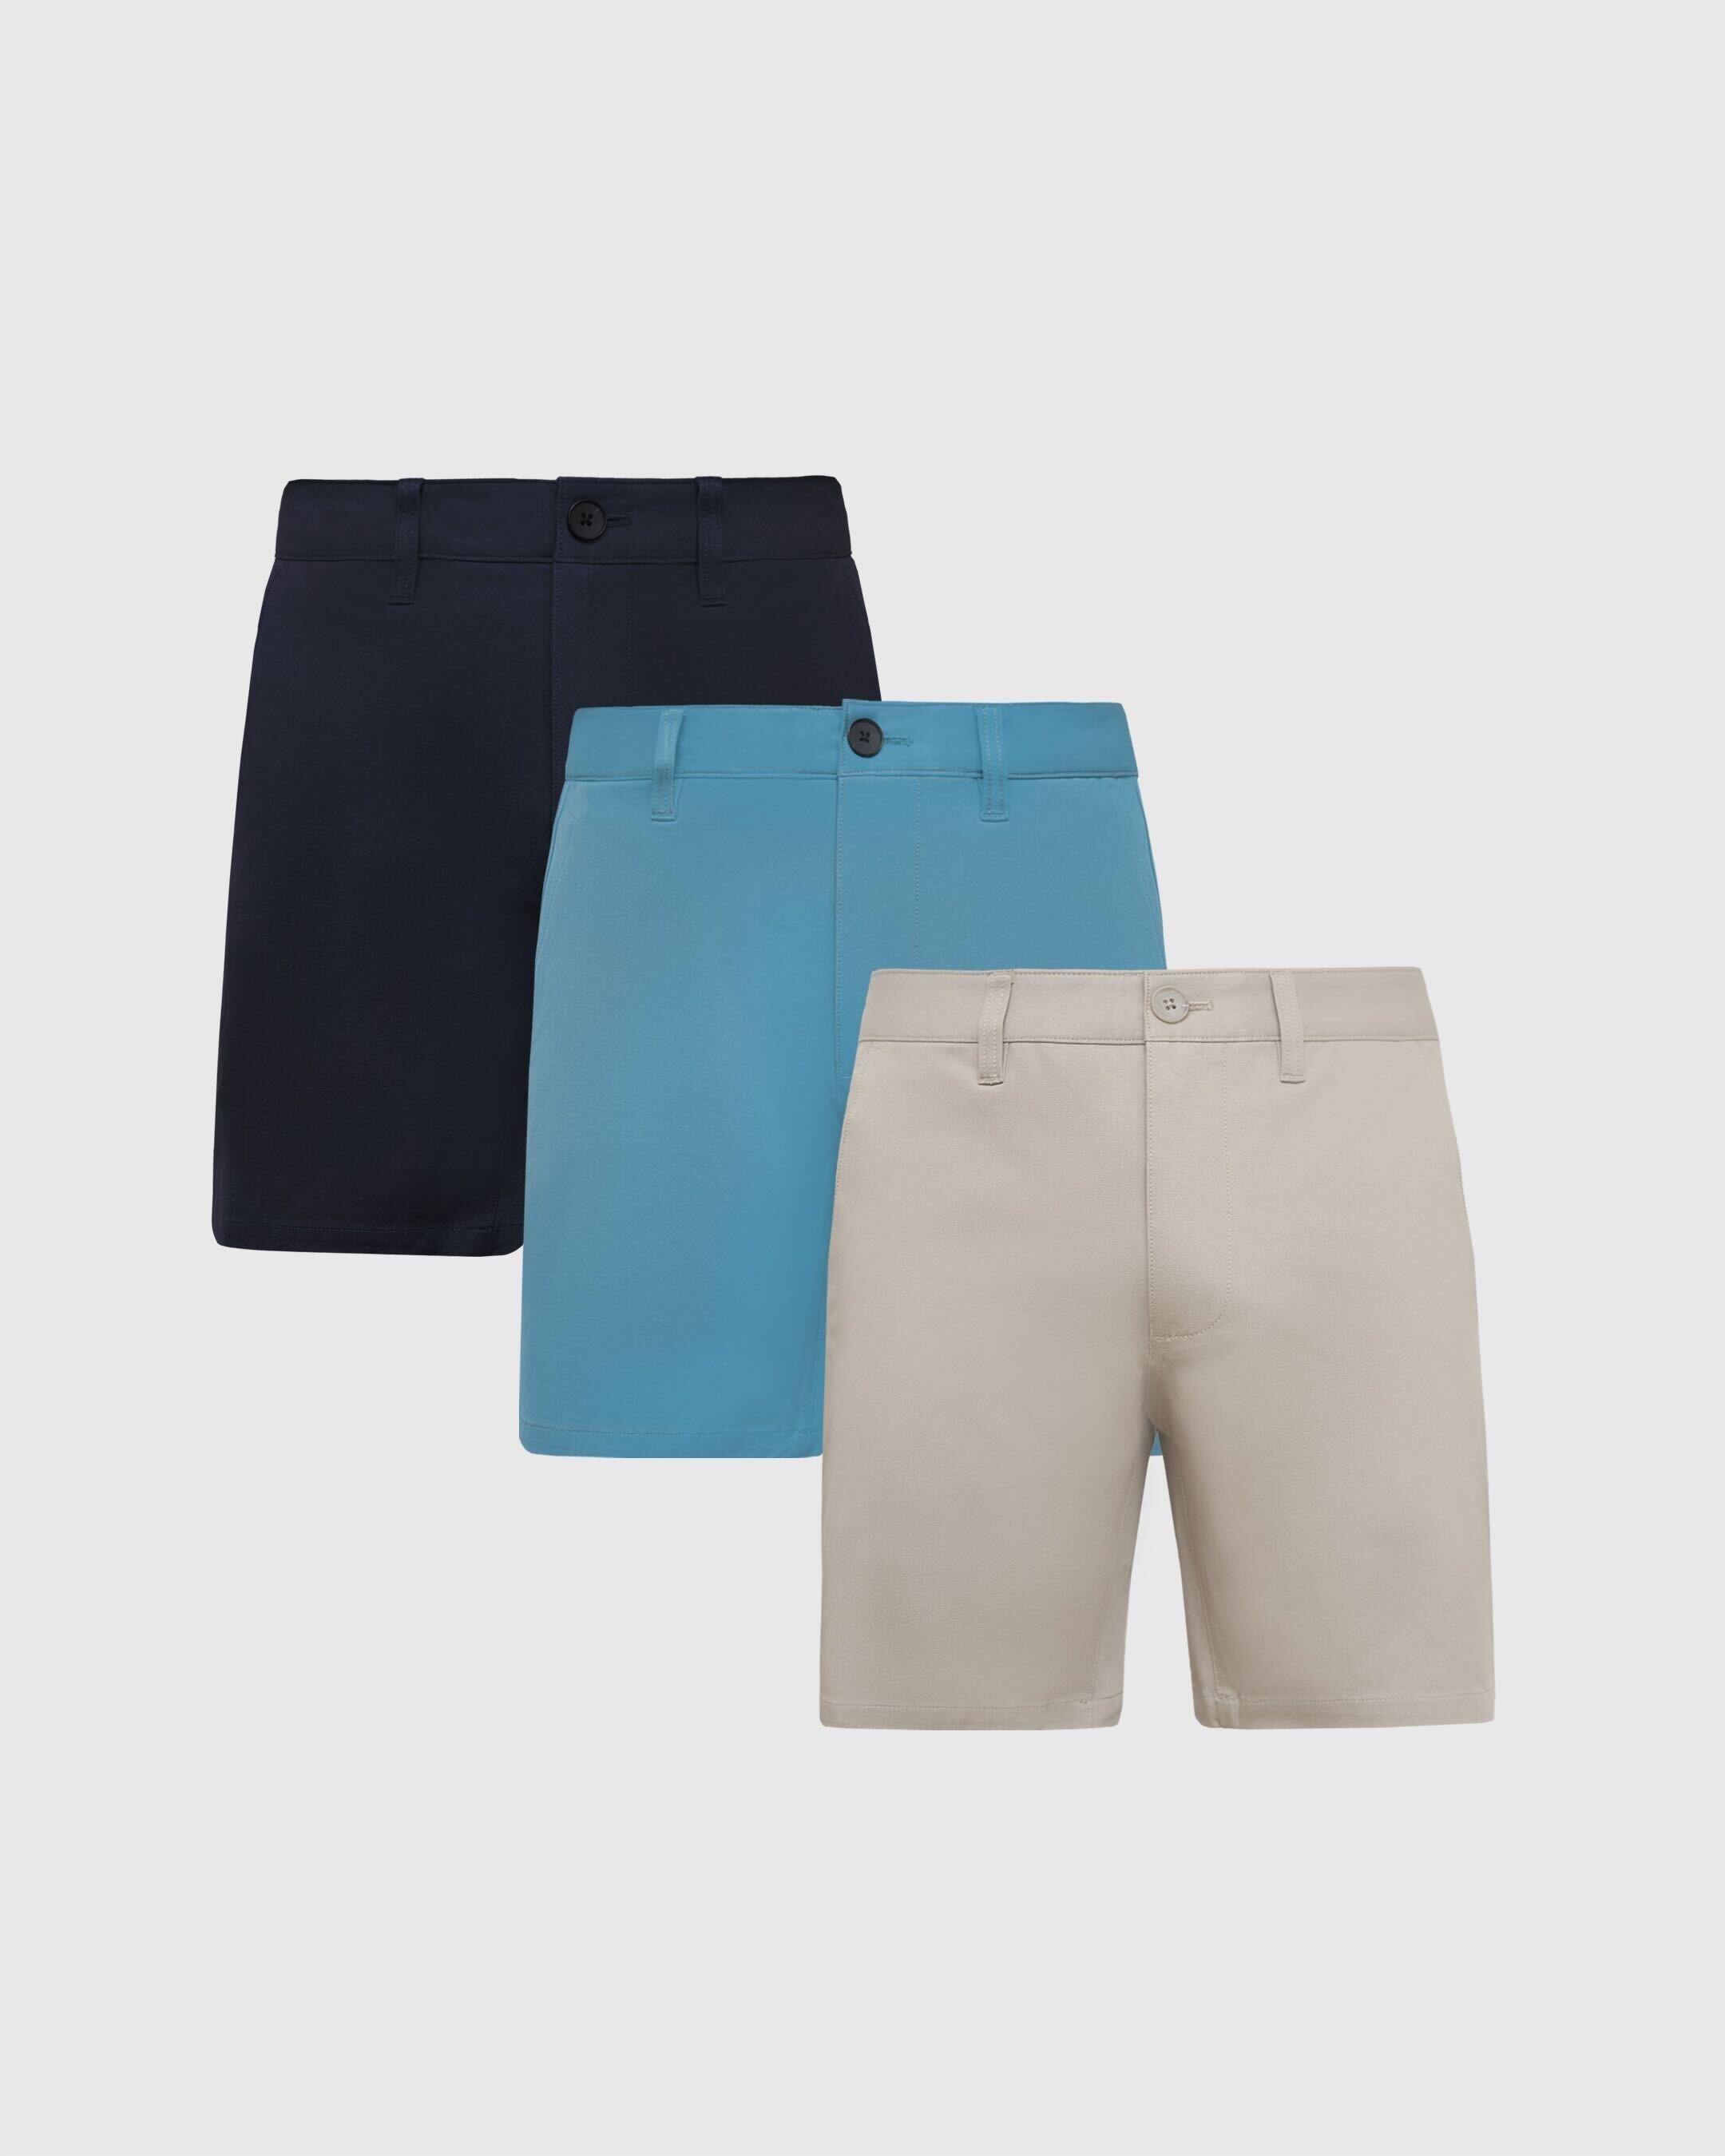 7" Twill Shorts Cool Tones 3-Pack